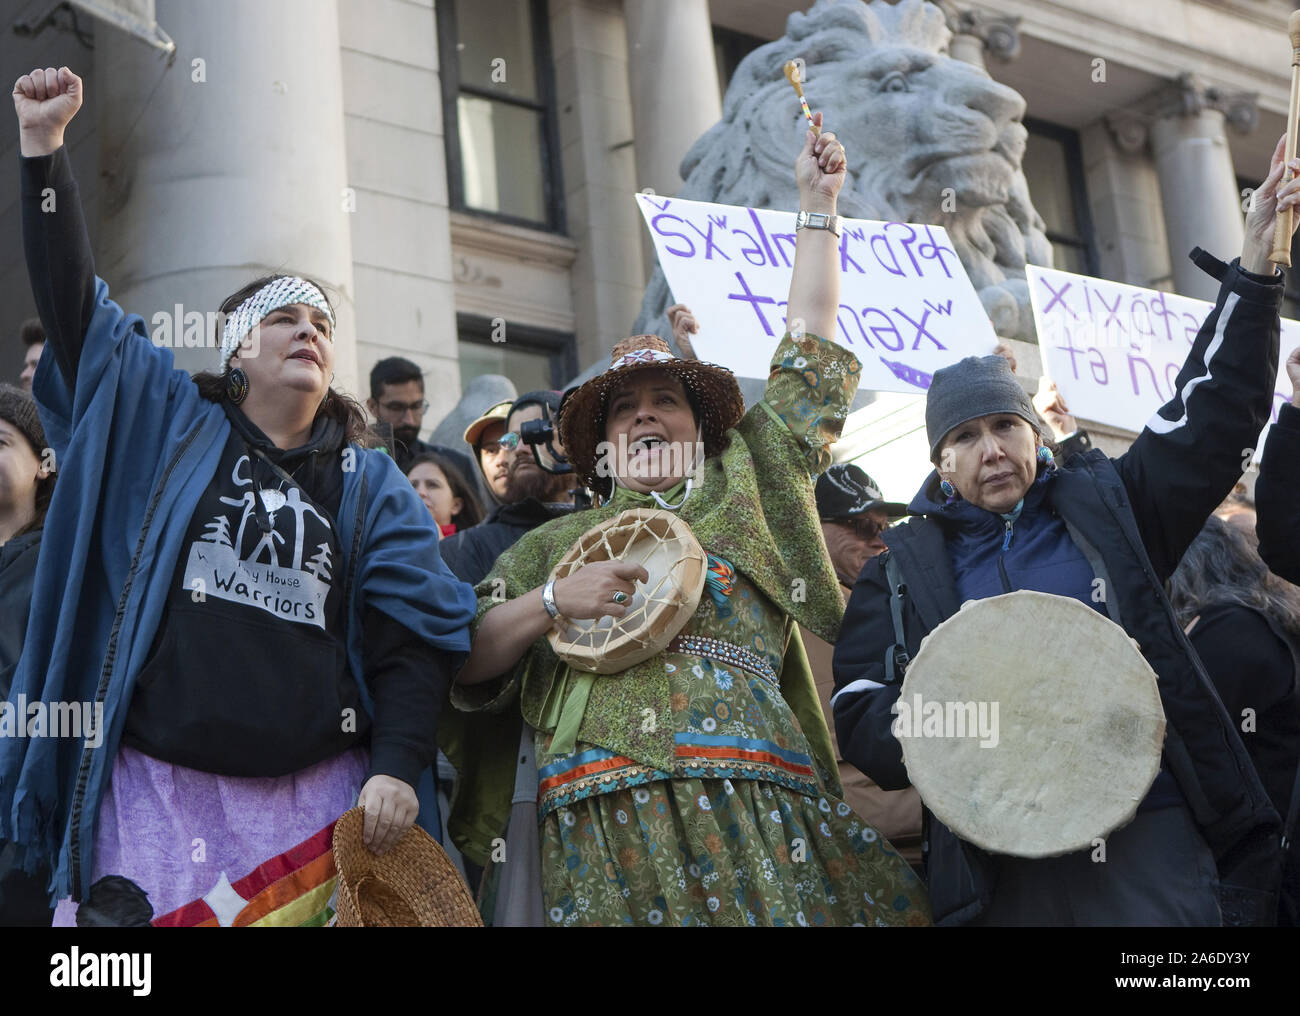 Vancouver, Canada. 25th Oct, 2019. First nations elders sing and drum after Swedish teen activist Greta Thunberg arrives for the post federal election Friday climate strike march starting and ending at the Vancouver Art Gallery in Vancouver, British Columbia on Friday, October 25, 2019. Organized by local youth-led, Sustainabiliteens, Greta and a turn out of nearly 10,000 climate activists demand action from industry and the various levels of government and are supporting the 15-youth who announced their plans to sue the federal government alleging it has contributed to climate change. Credit: Stock Photo